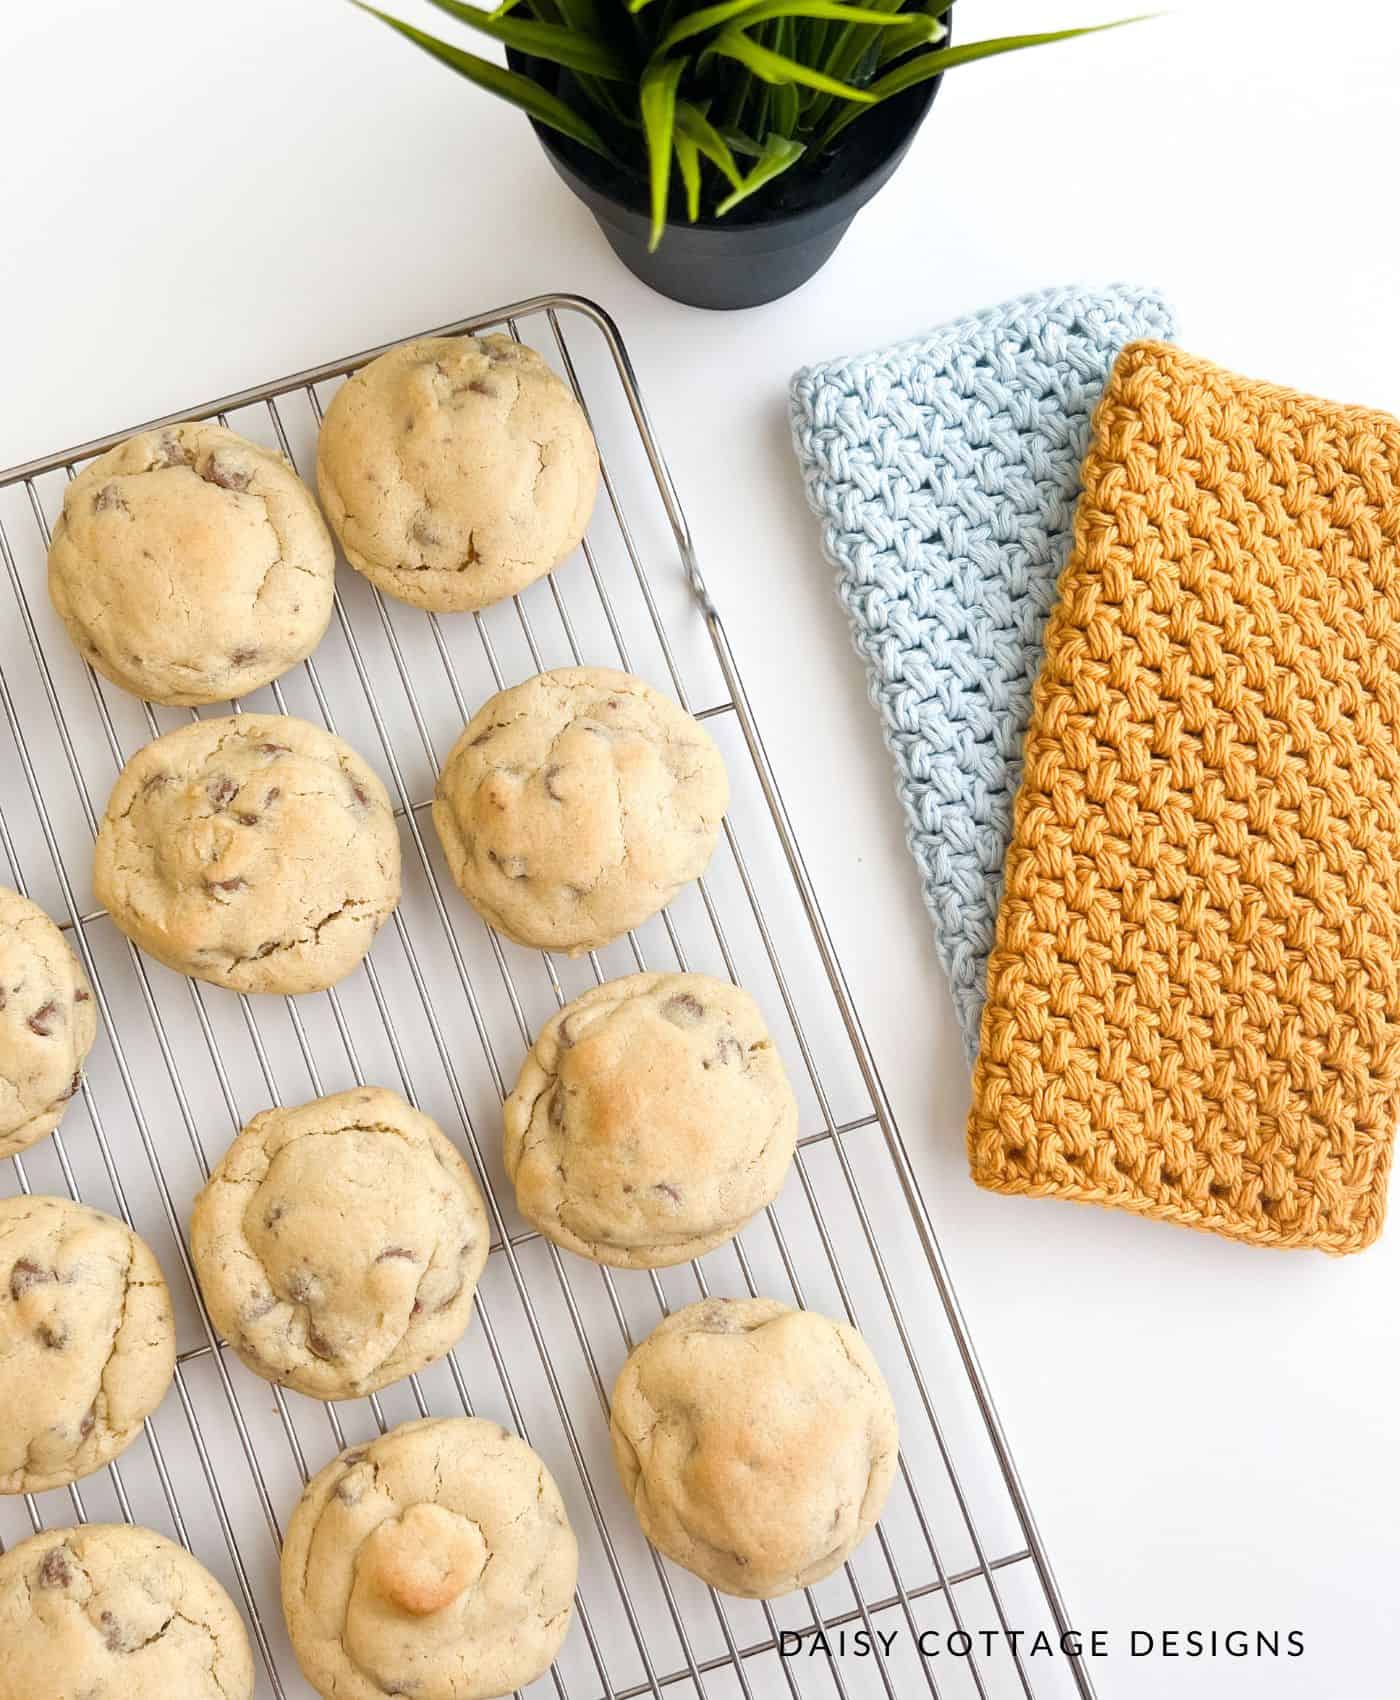 Chocolate chip cookies on a cooling rack with crochet dishcloths